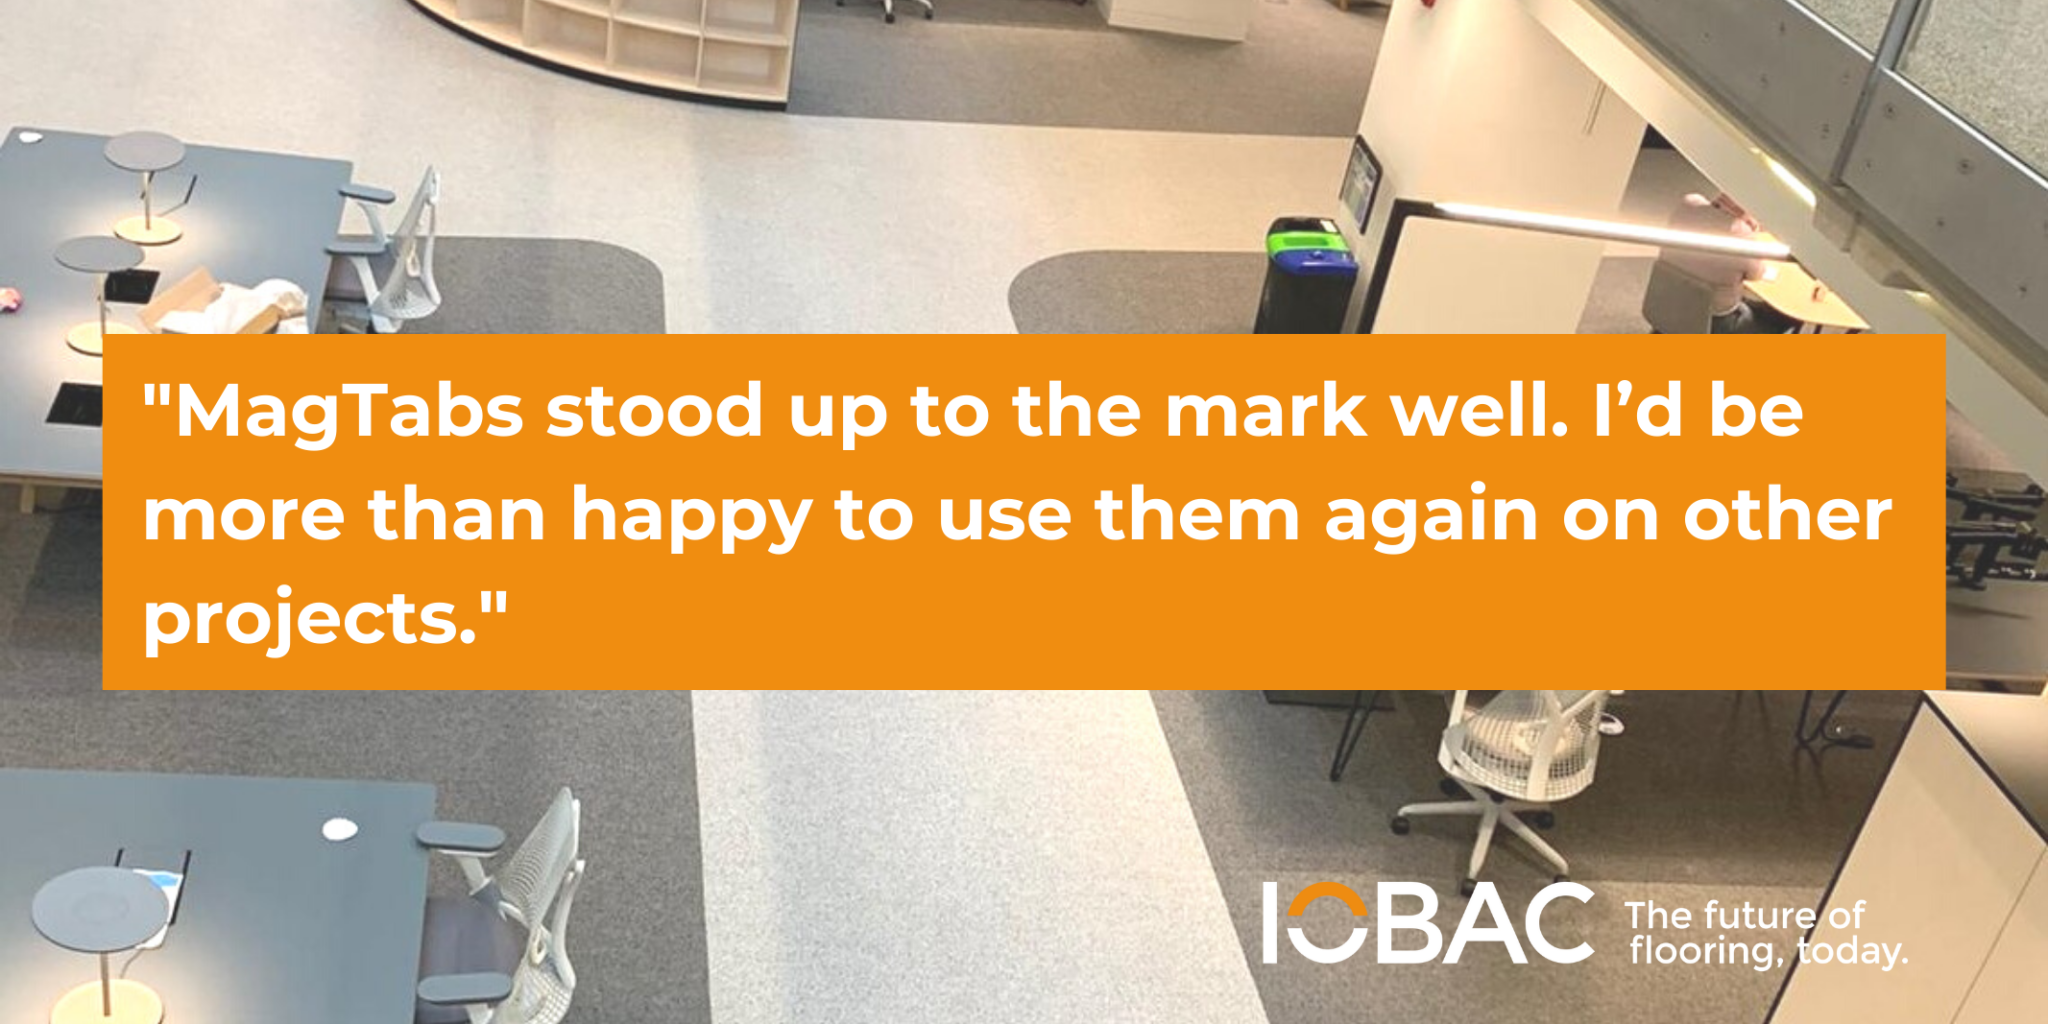 Sustainable Workplace - IOBAC MagTabs Case Study